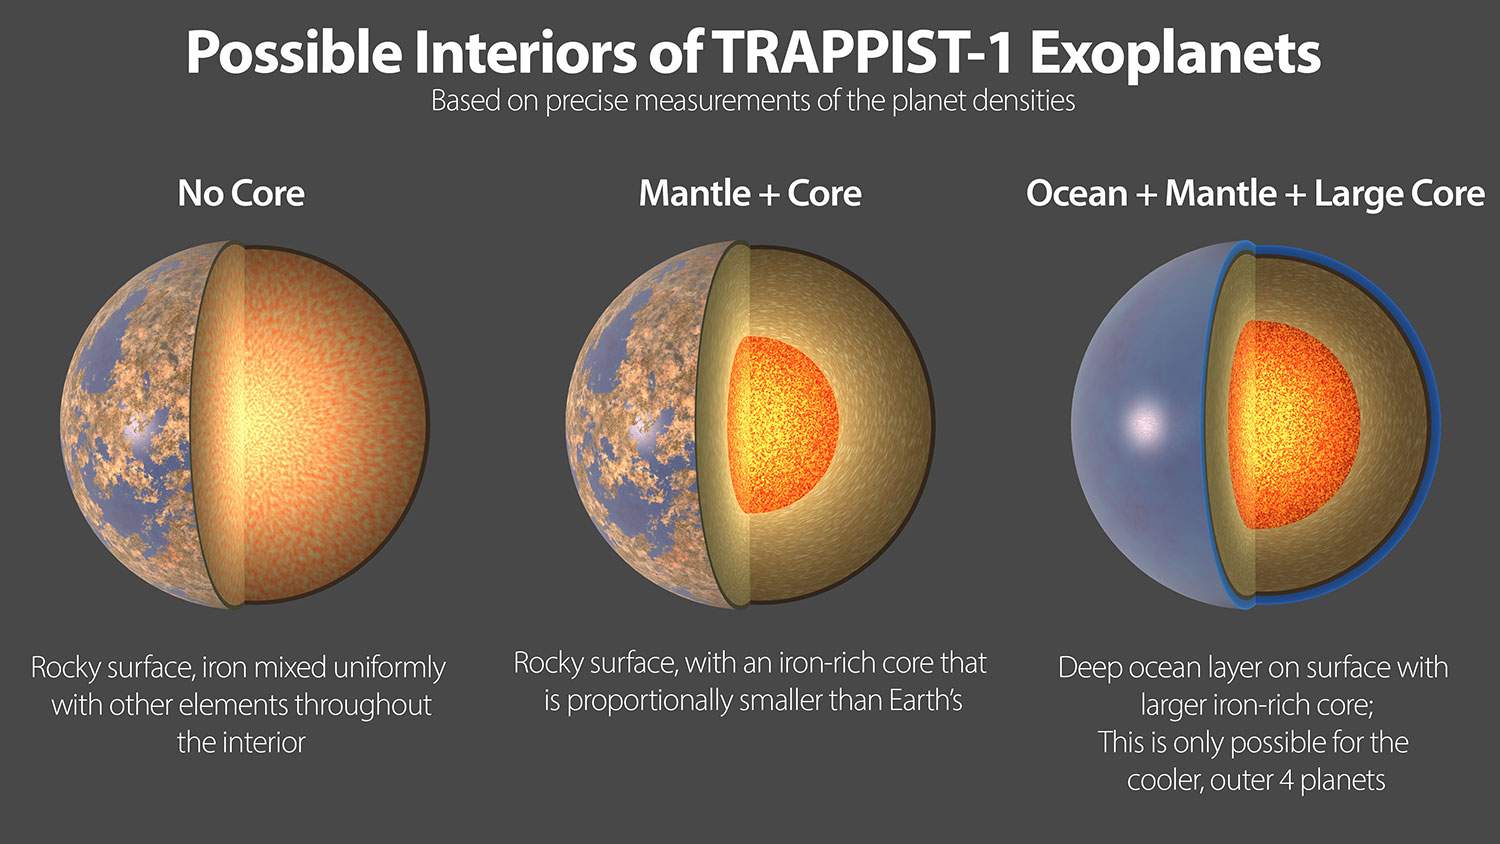 Three possible interiors of the TRAPPIST-1 exoplanets